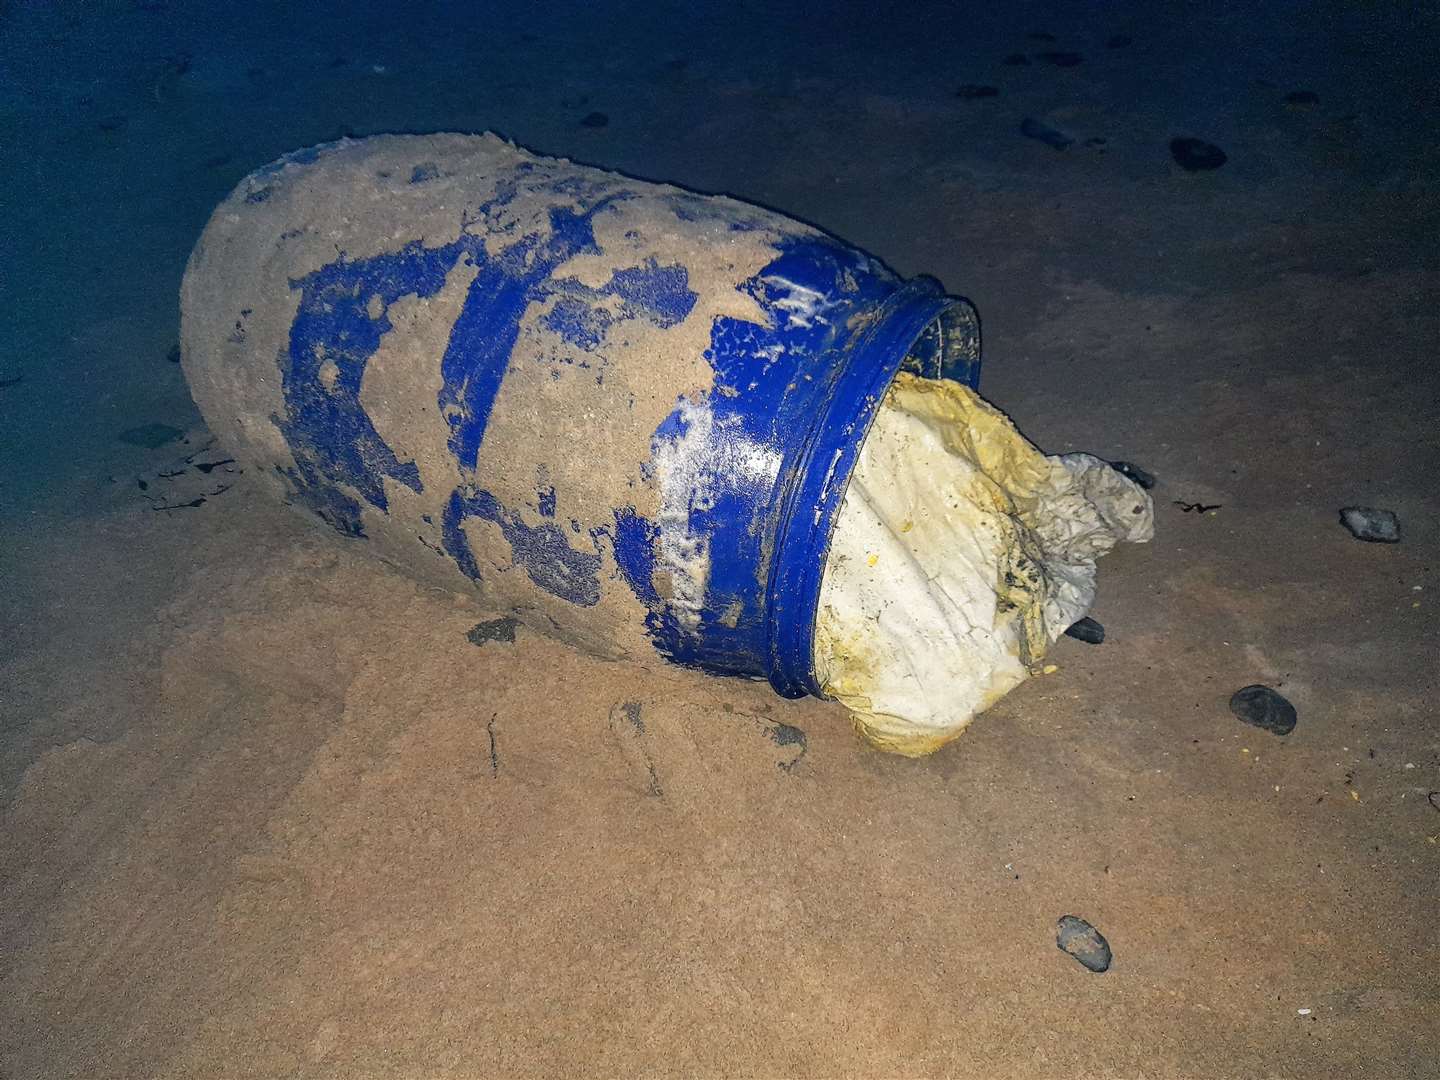 The barrel with its contents exposed at Dunnet beach on Wednesday.